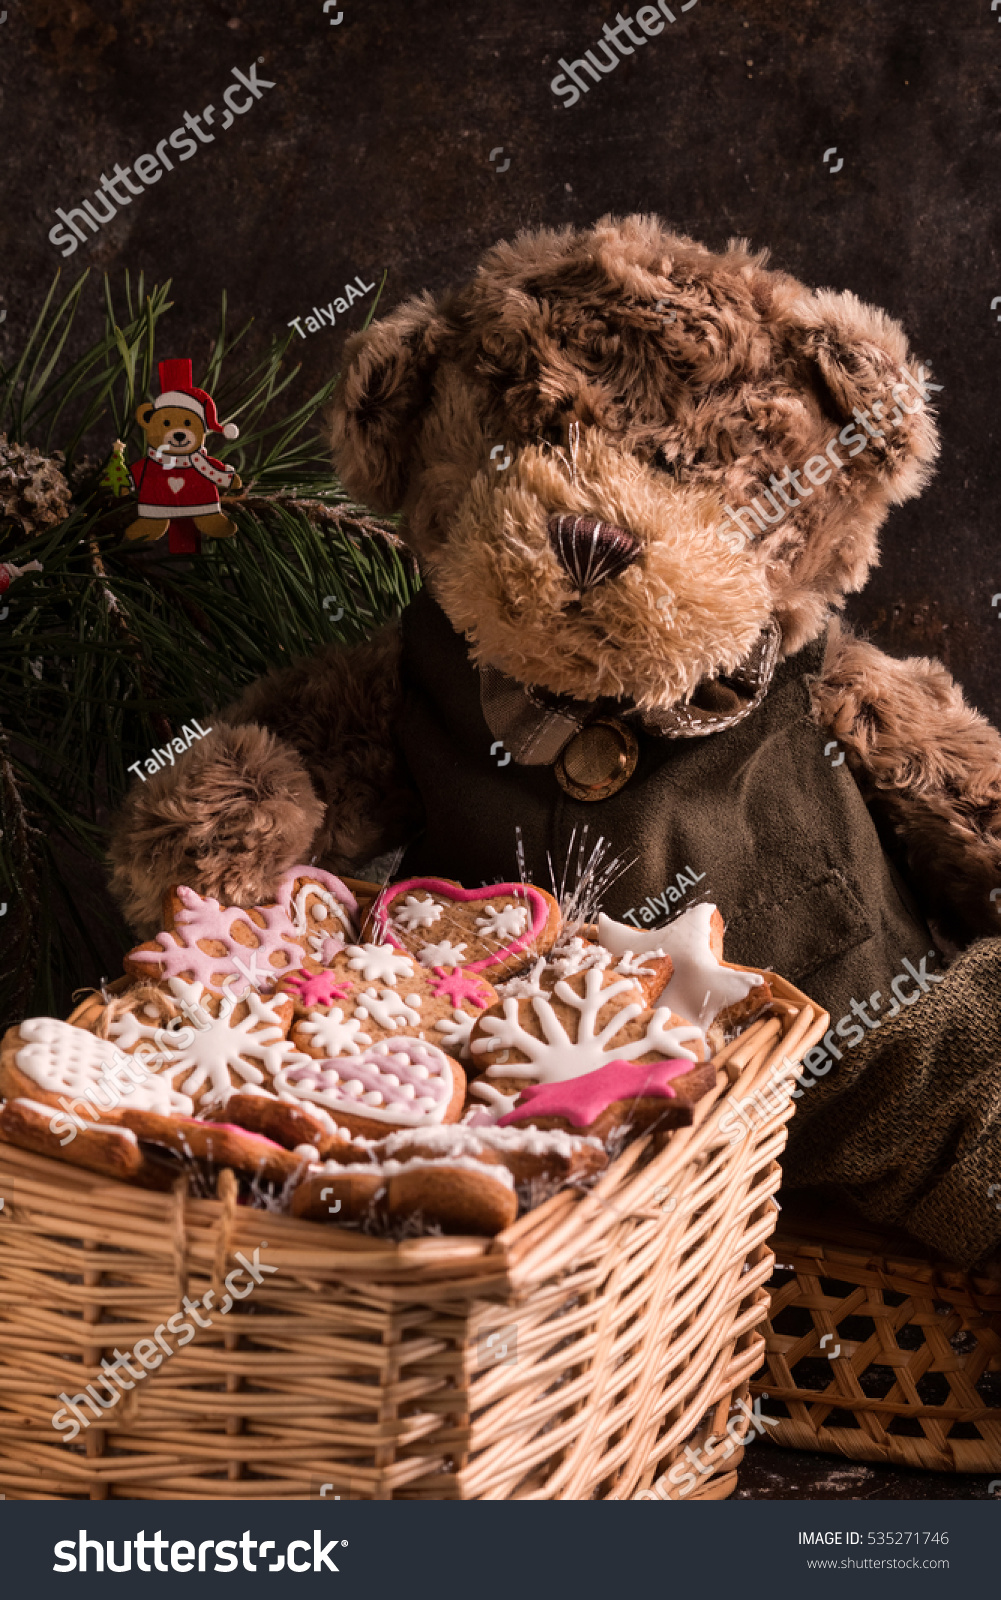 Christmas Cookies in a shape of Snowflake, Heart and Star. Cookie Exchange. Basket with Old-Fashioned Gingerbread Cookies. Perfect for holiday season. Box of Christmas Cookies with Teddy Bear.  #535271746